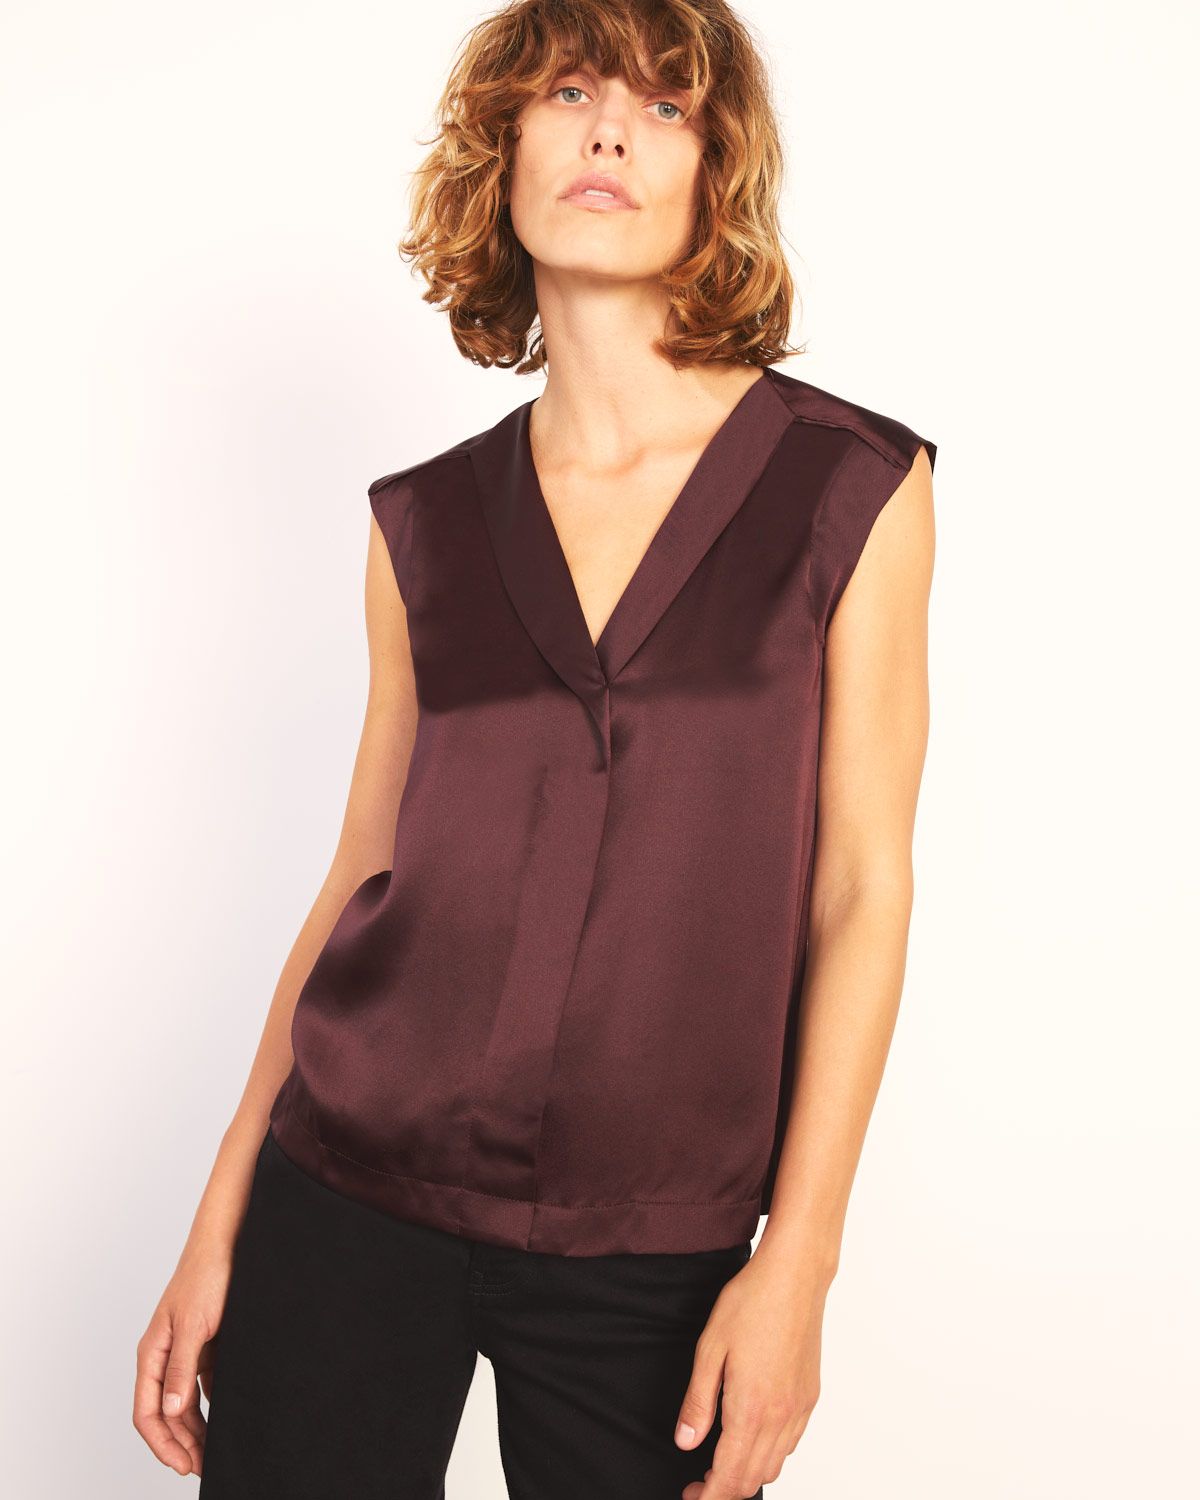 Sophisticated silk shirt with 100% silk satin front and soft modal jersey back. Relaxed fit with flattering V-shaped neckline. Wear for work with tailored trousers or style with jeans for a casual look.